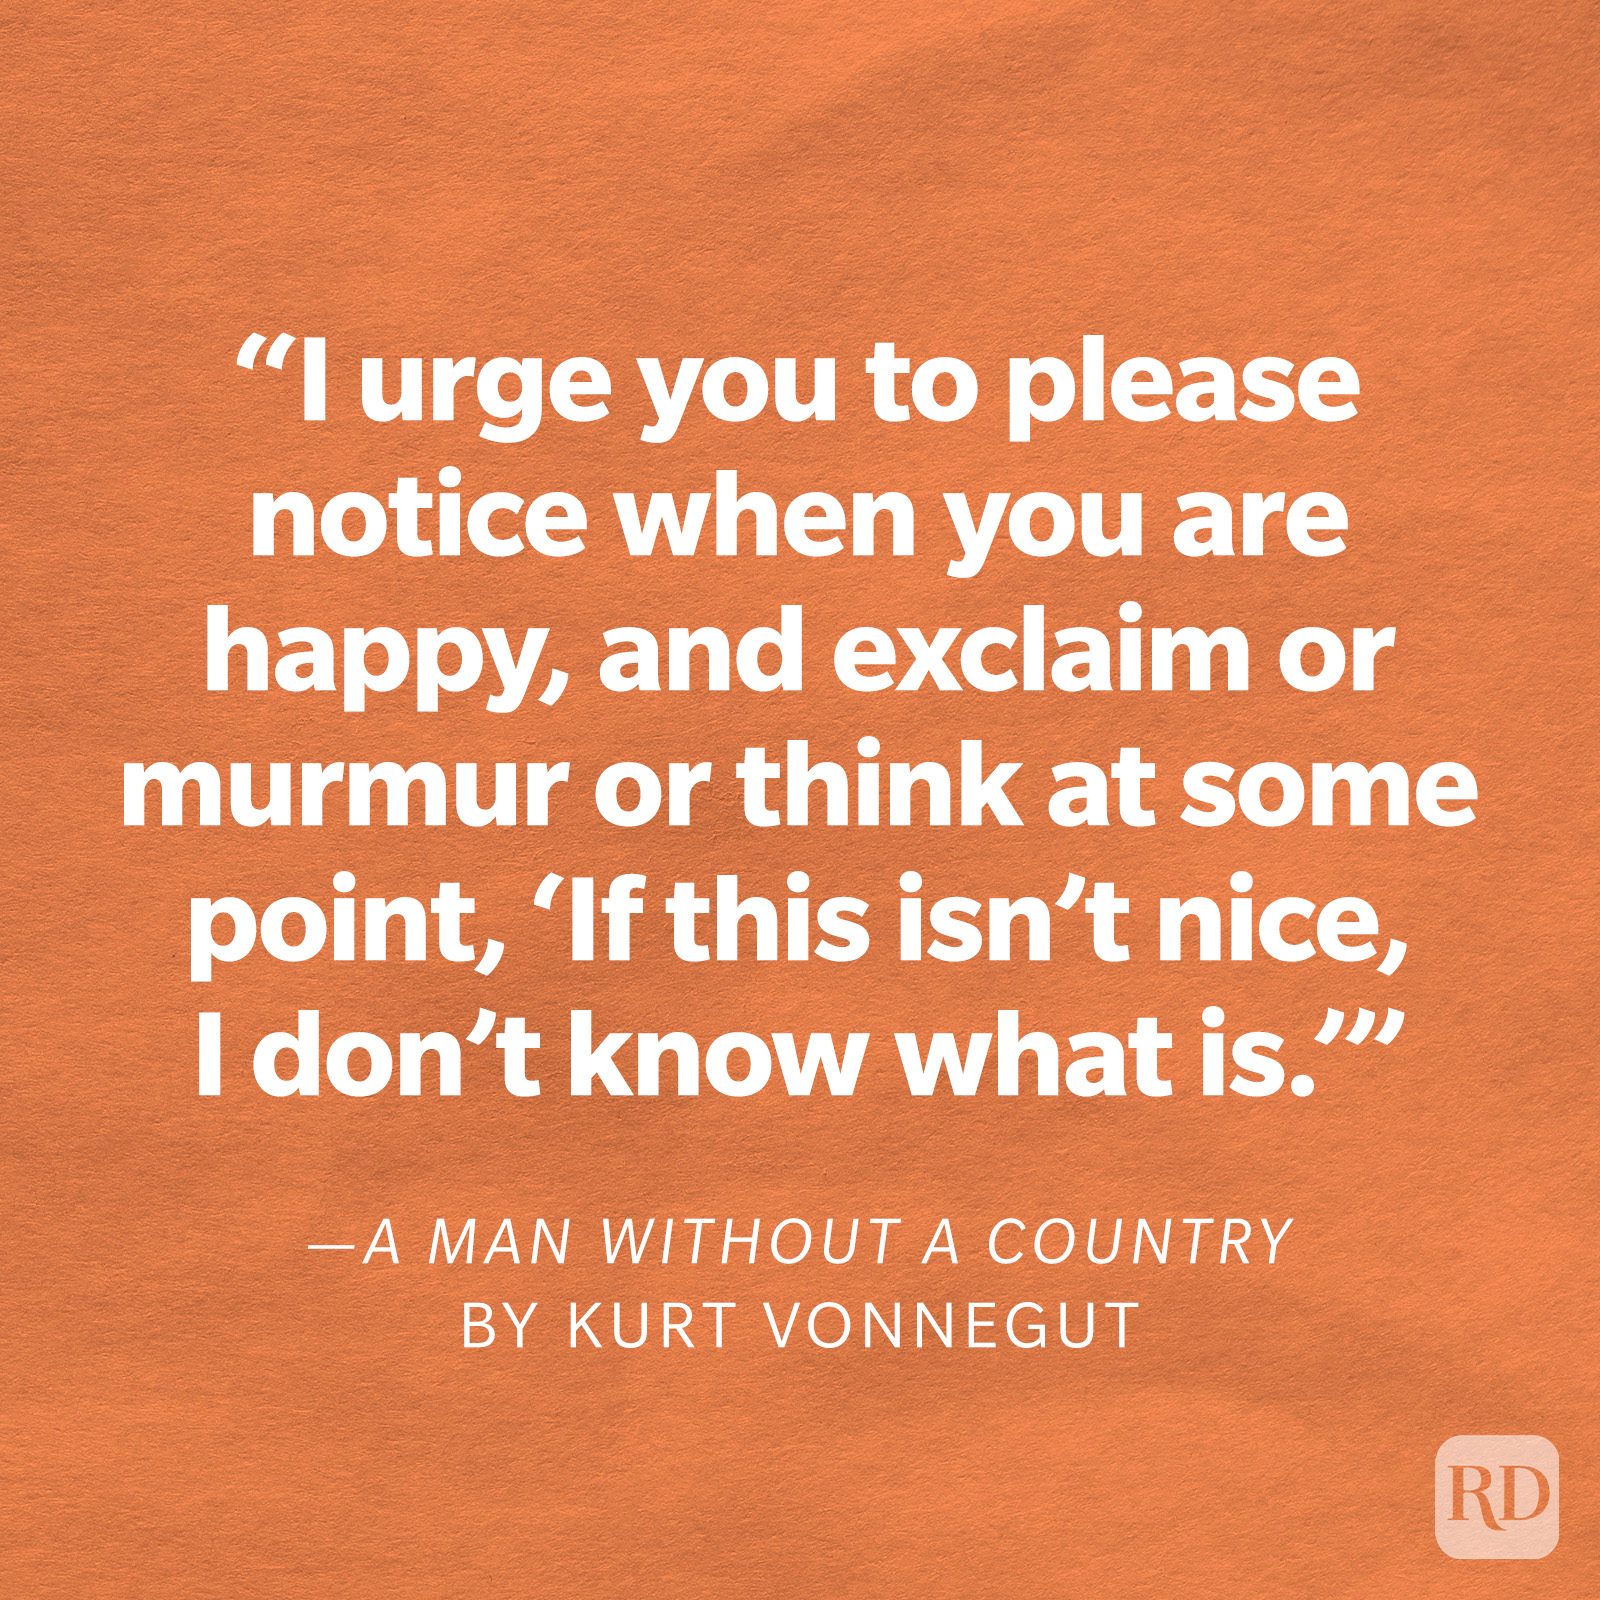 A Man Without a Country by Kurt Vonnegut "I urge you to please notice when you are happy, and exclaim or murmur or think at some point, 'If this isn't nice, I don't know what is.'"